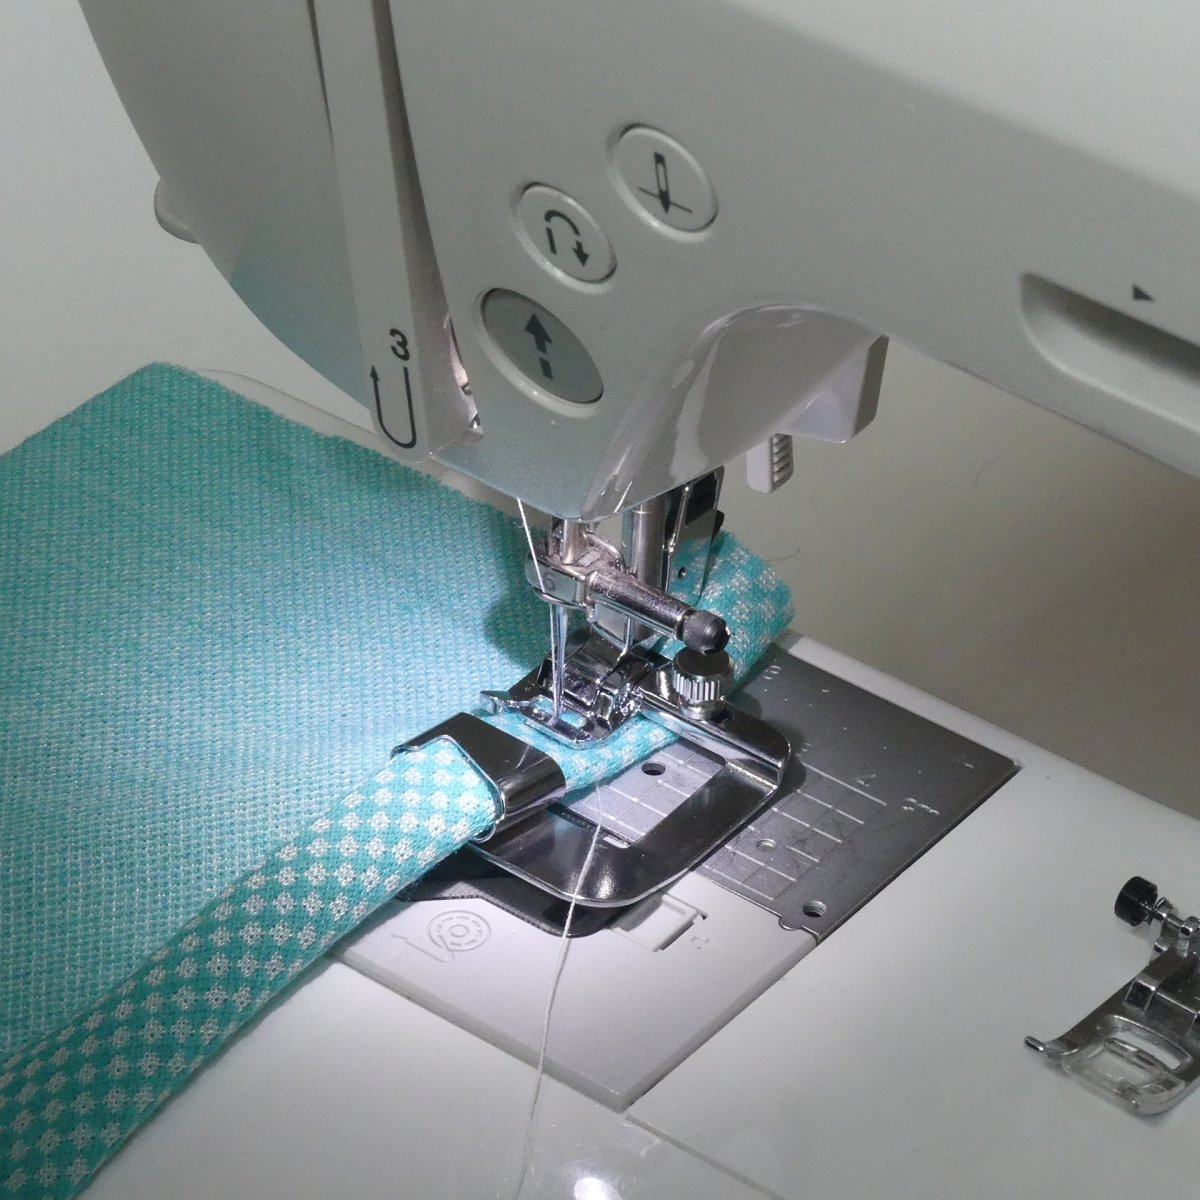 Hemming foot on a sewing machine